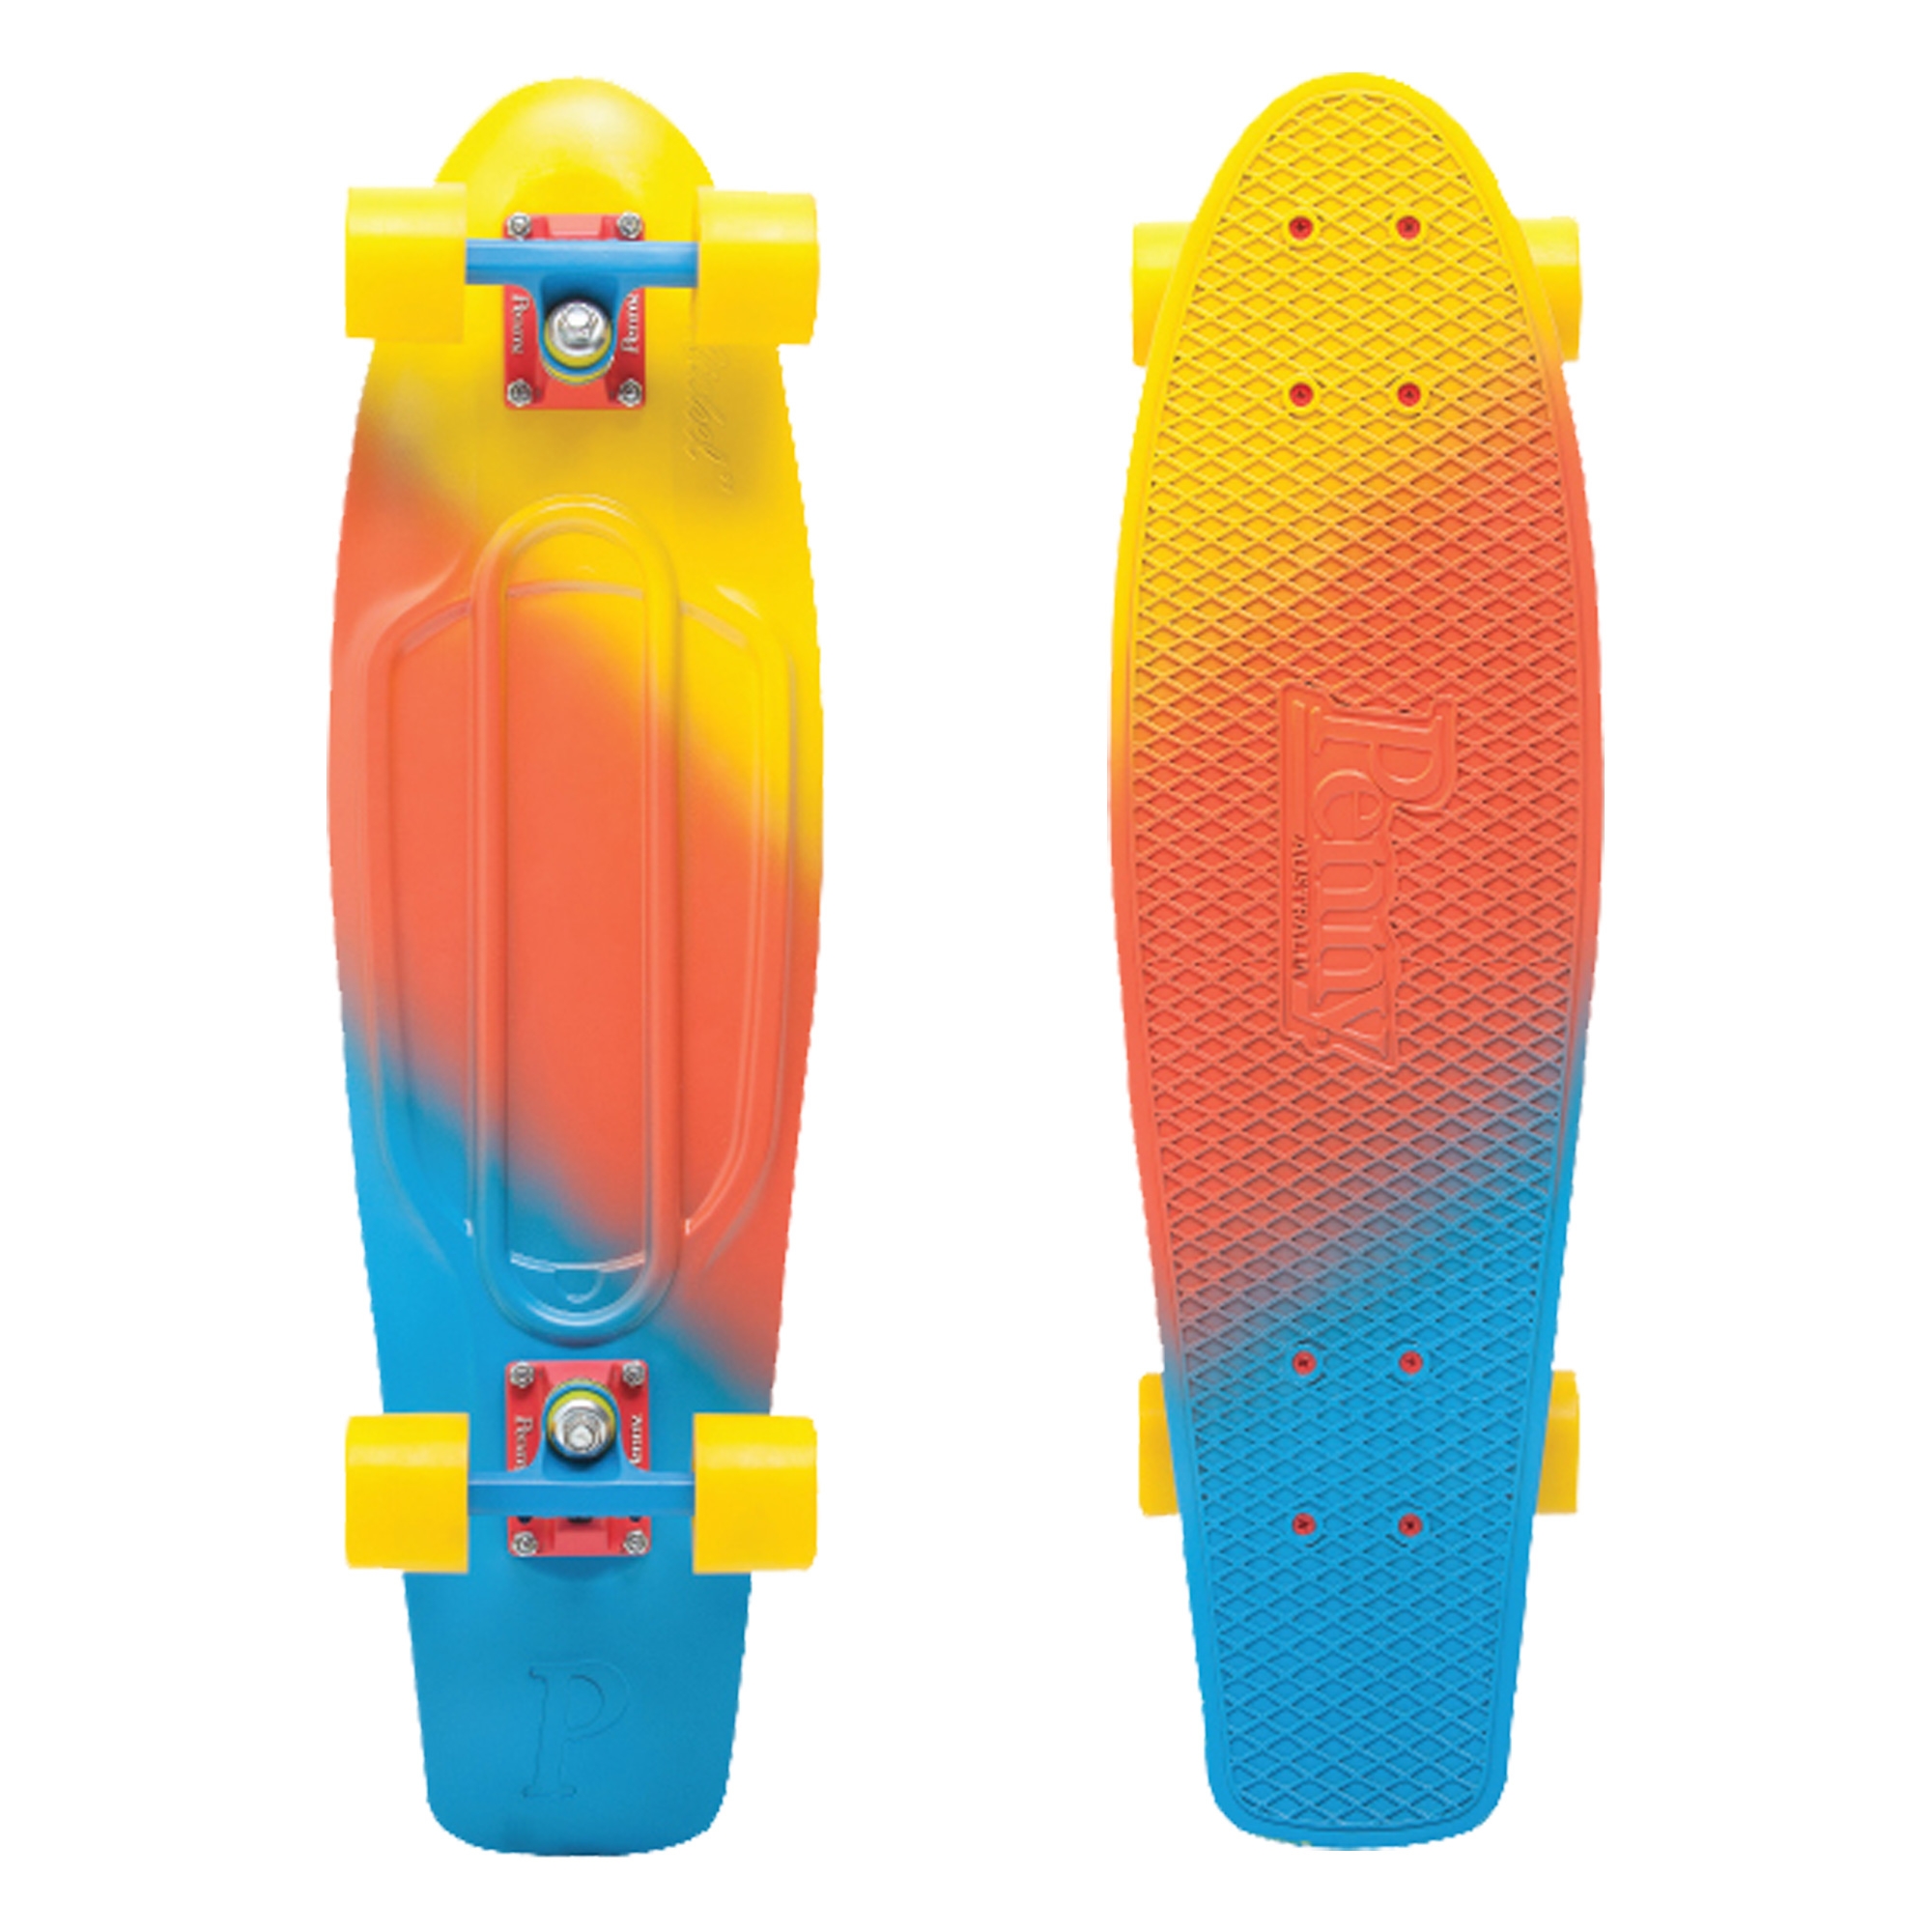 PENNY Complete 22 FADES SERIES Skateboard, yellow/red/blue (canary) One Size